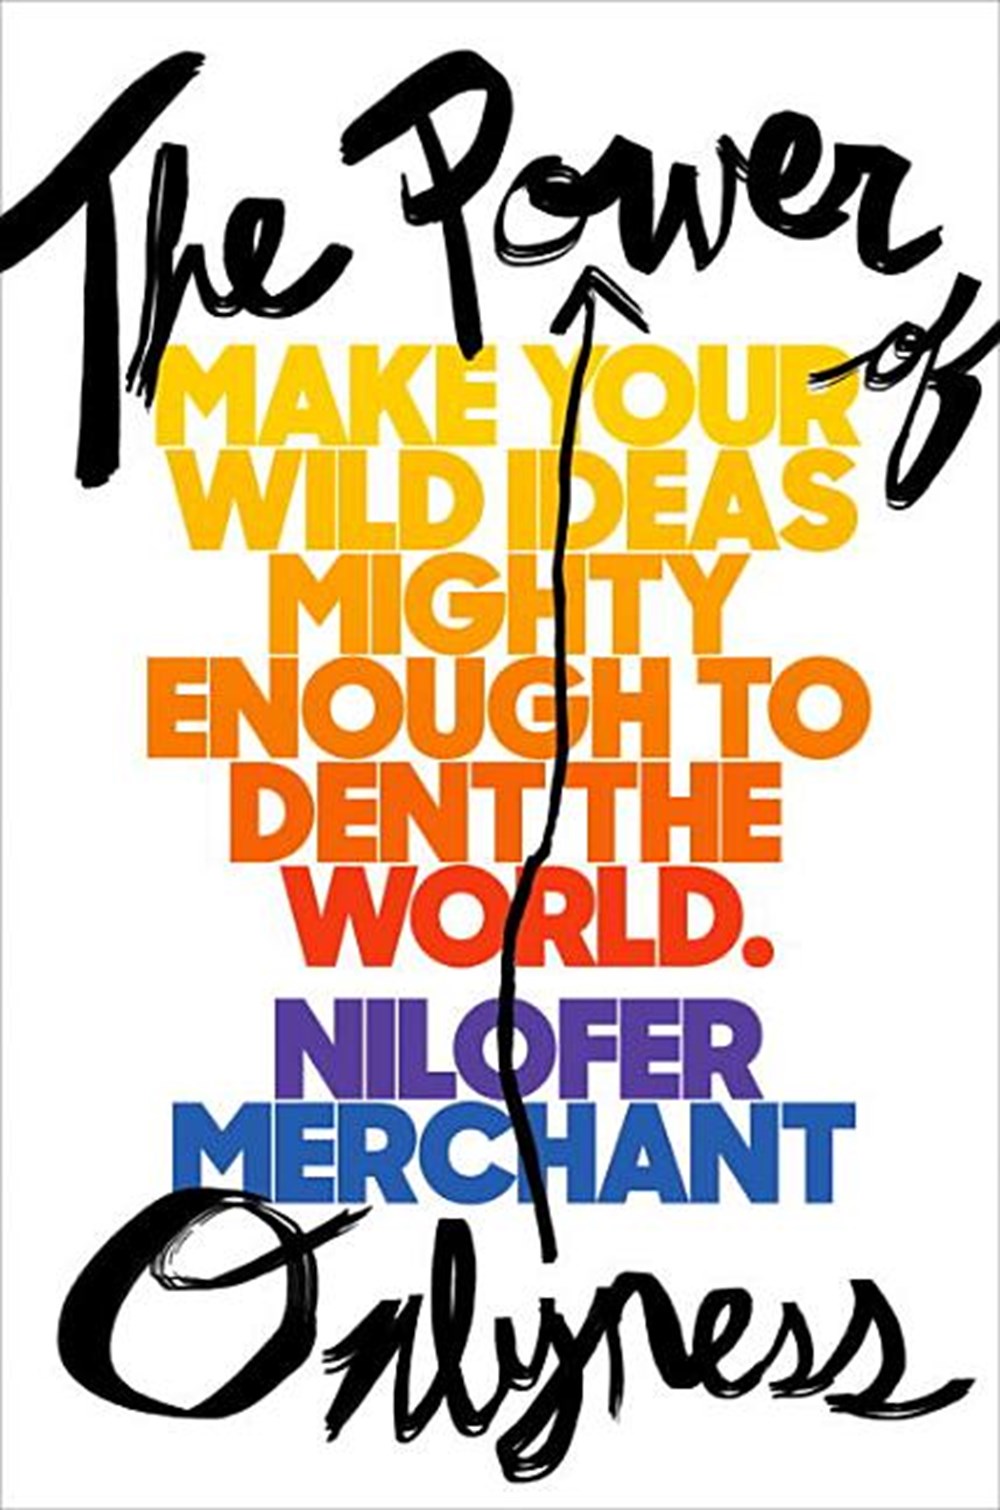 Power of Onlyness: Make Your Wild Ideas Mighty Enough to Dent the World